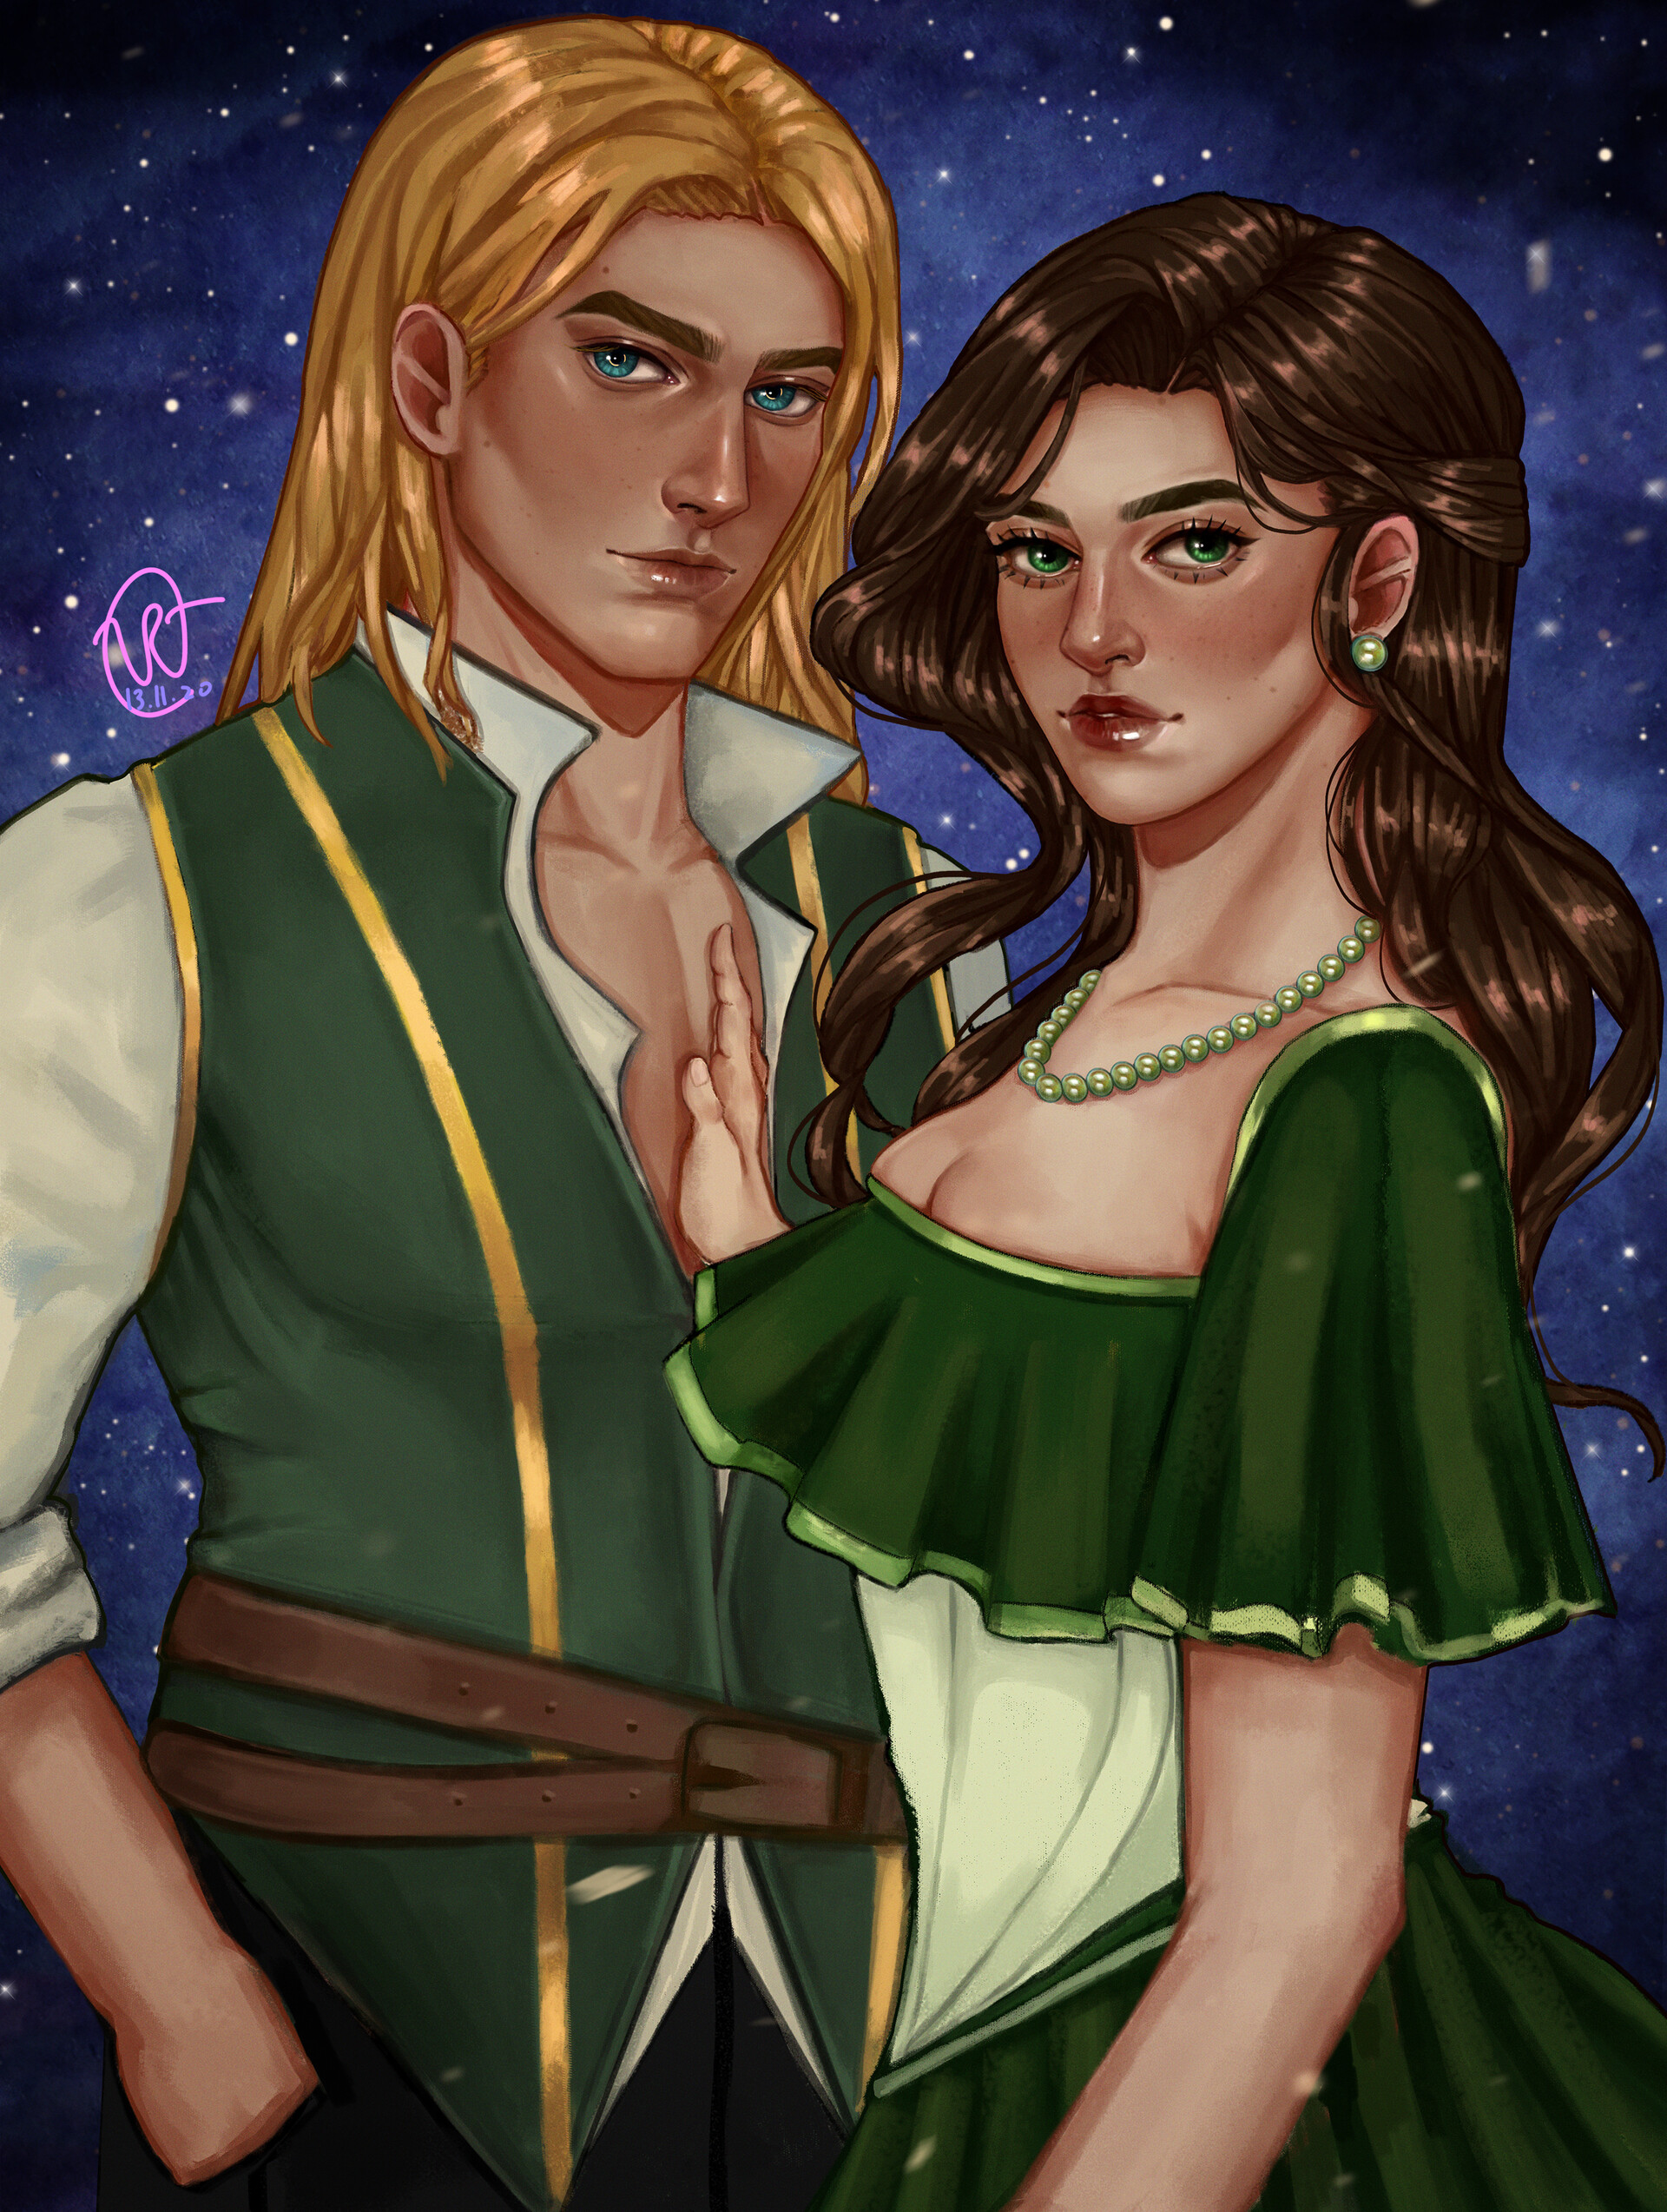 Lysandra and Aedion from Throne of Glass series by Sarah J Maas.